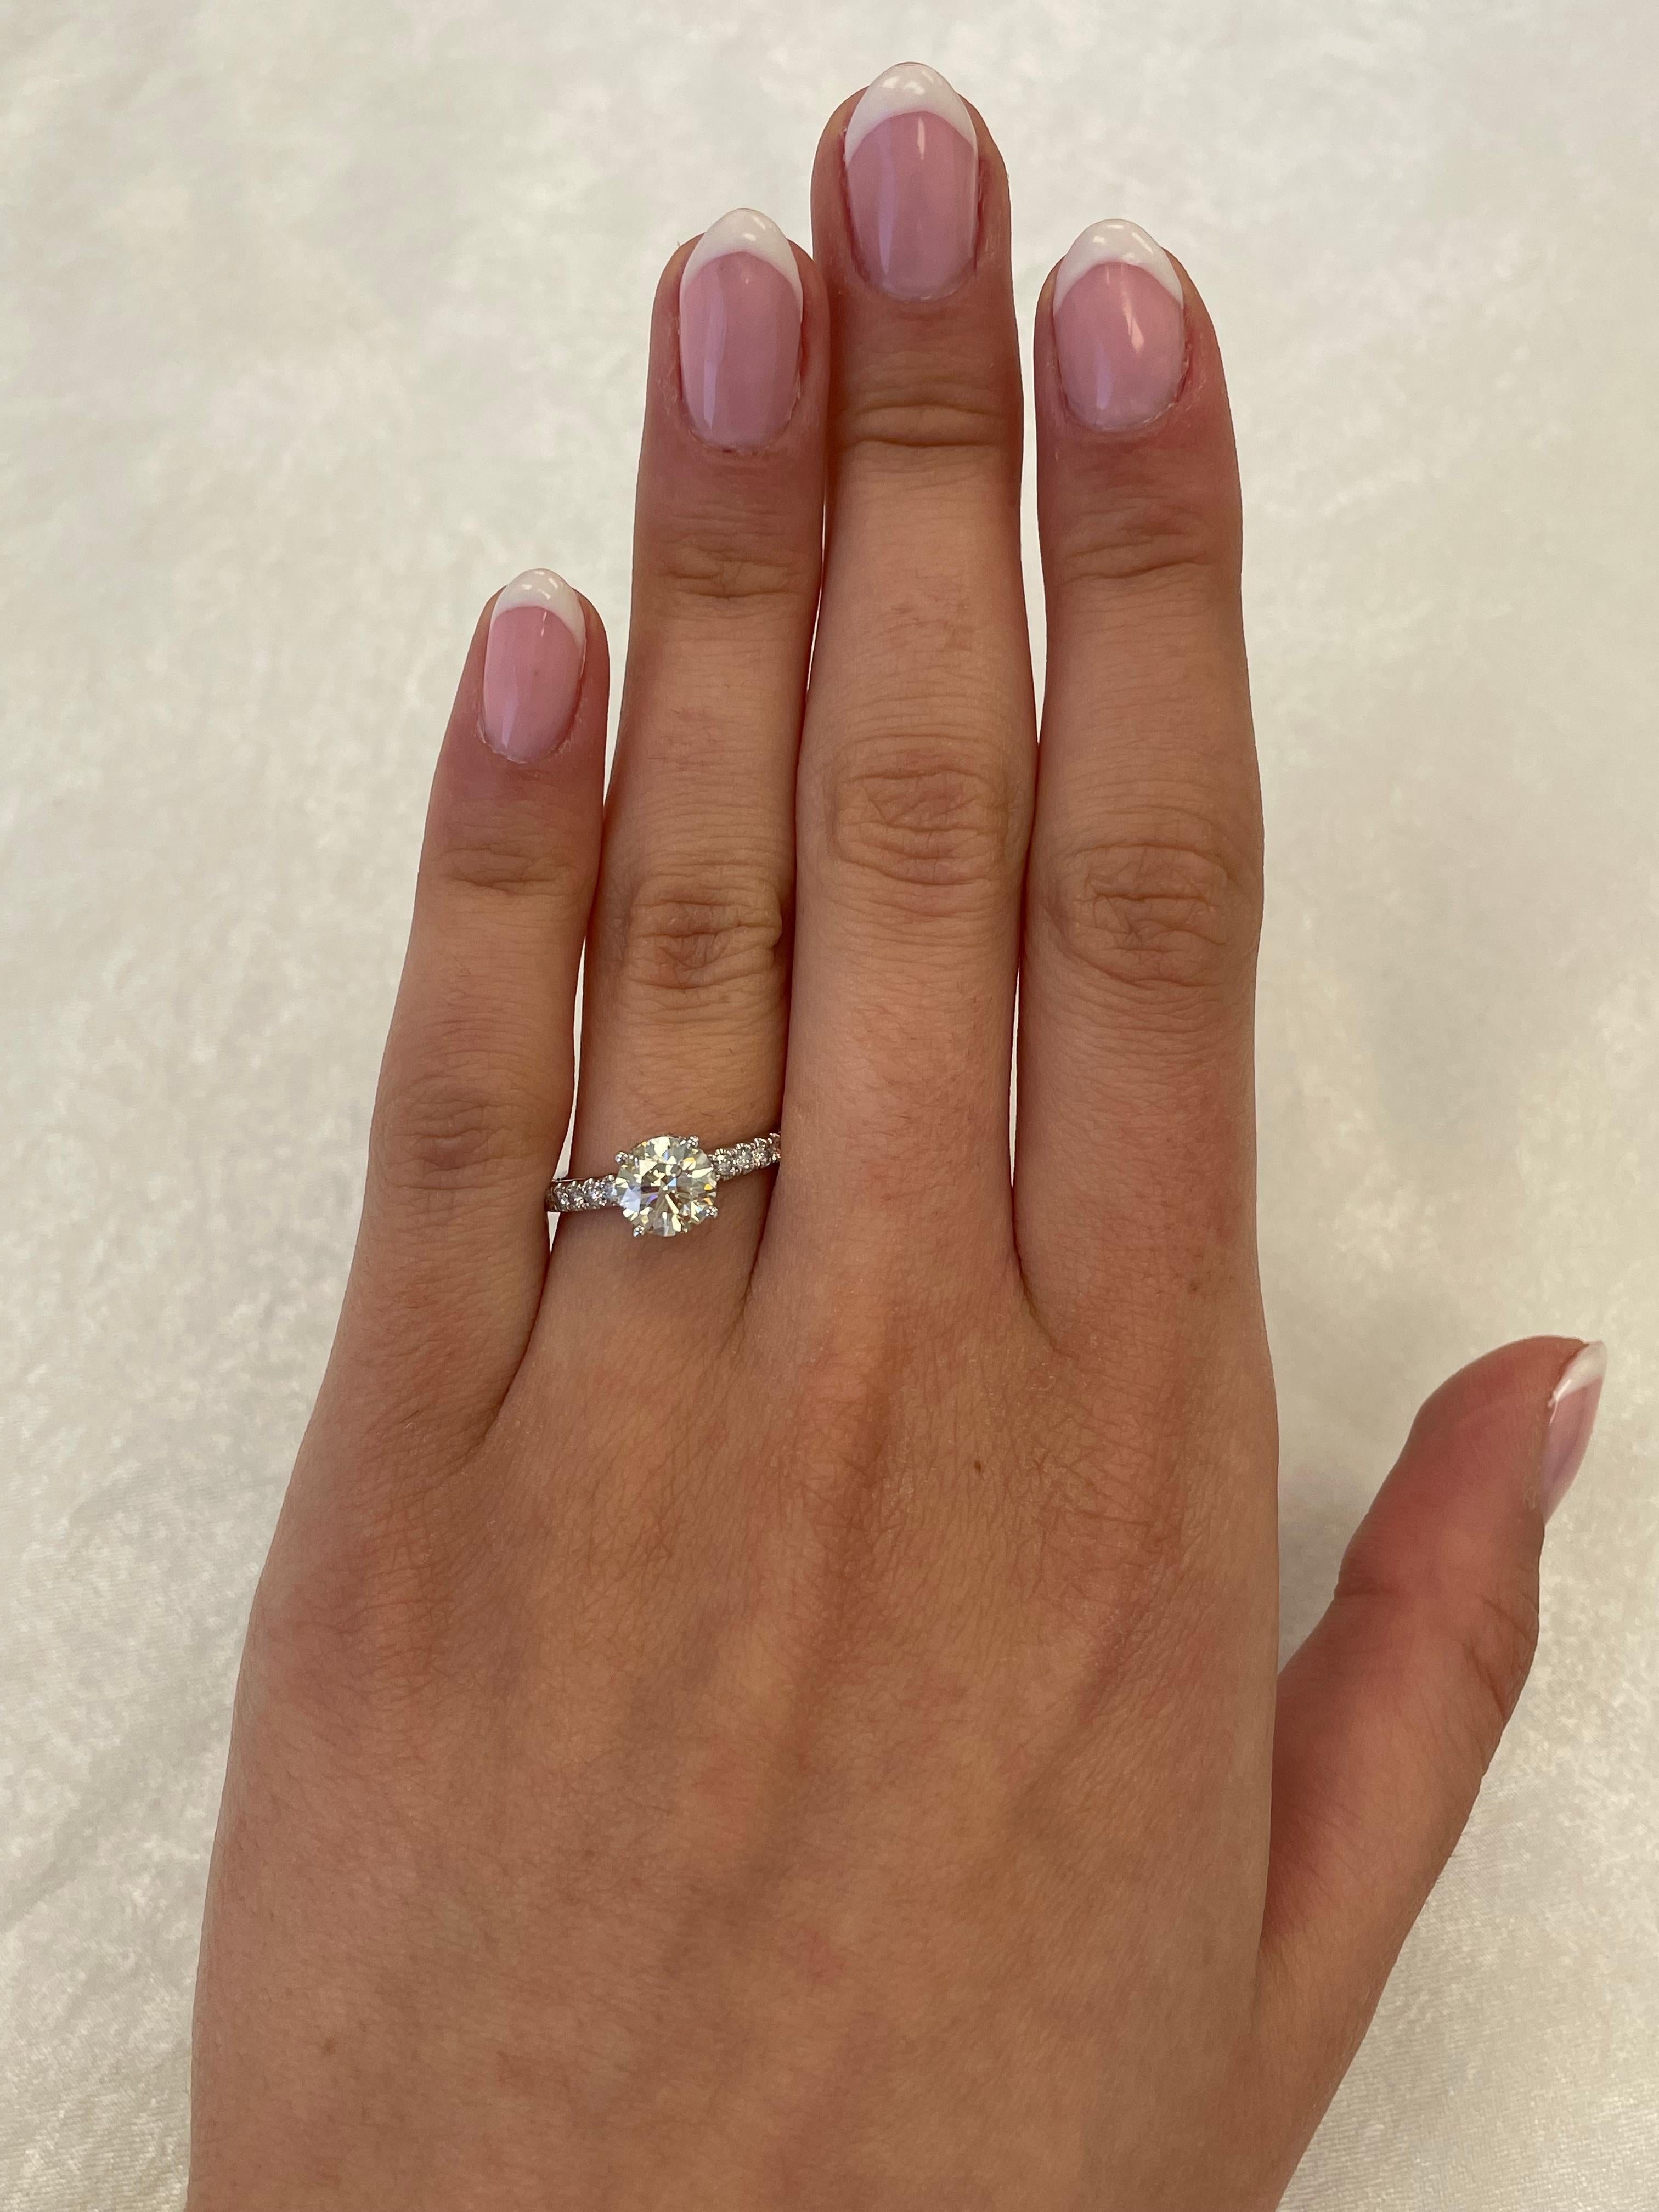 Classic solitaire diamond engagement ring with diamonds down the shank, EGL certified.
1.55 carats total diamond weight.
1.20 carat round brilliant diamond, EGL certified K color grade and SI3 clarity grade. Complimented by 0.35 carats of round